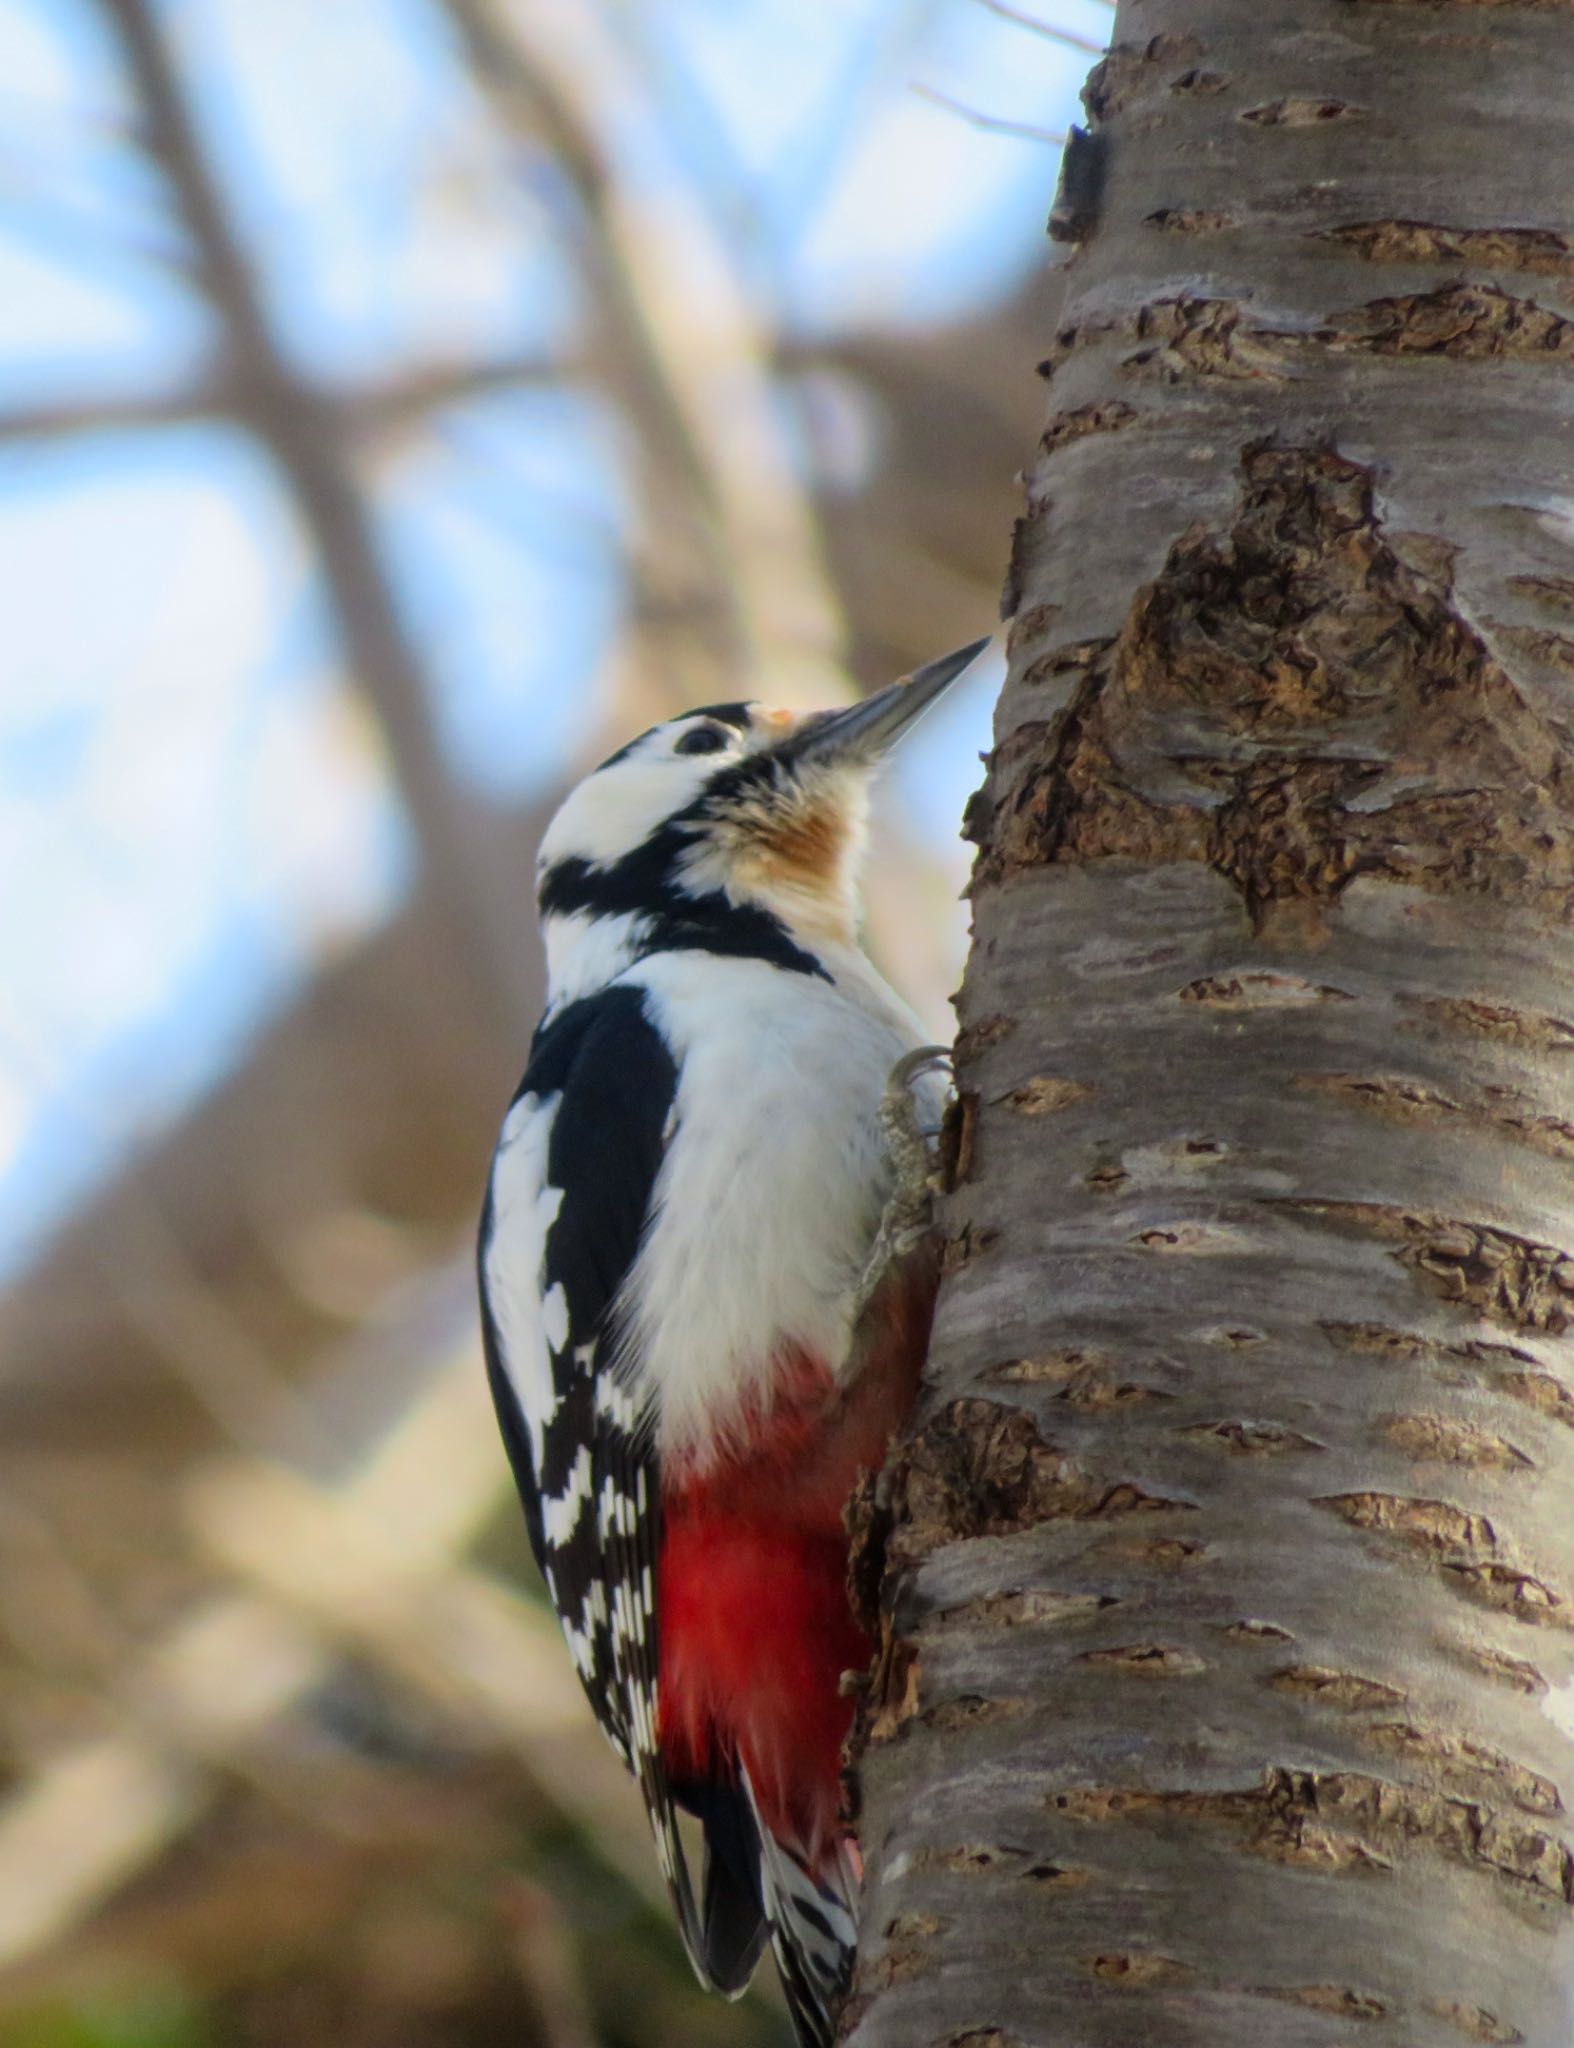 Photo of Great Spotted Woodpecker(japonicus) at Maruyama Park by xuuhiro